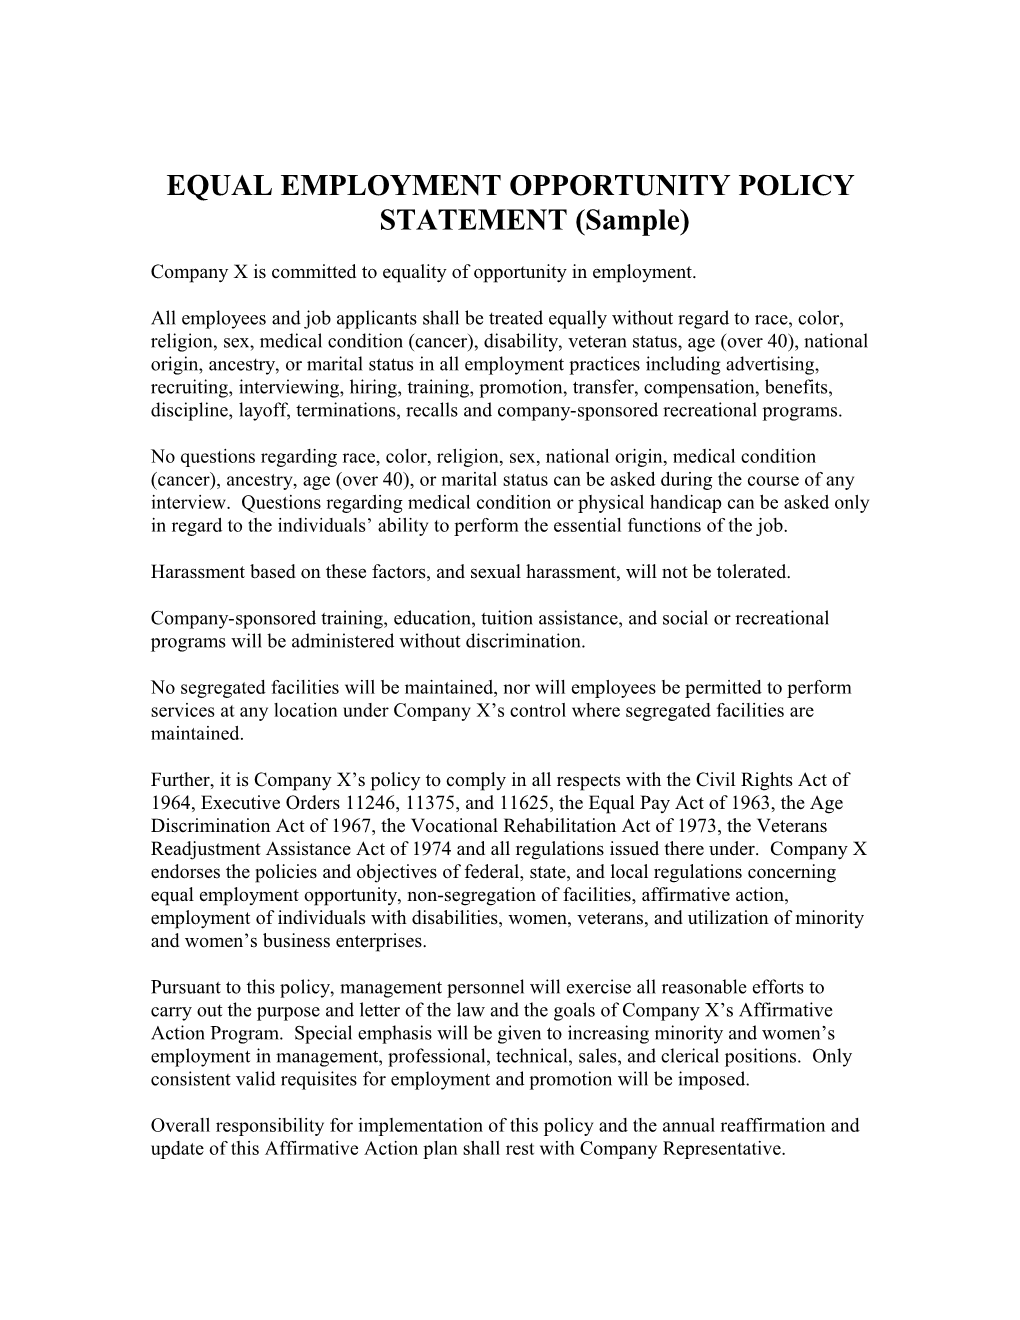 EQUAL EMPLOYMENT OPPORTUNITY POLICY STATEMENT (Sample)